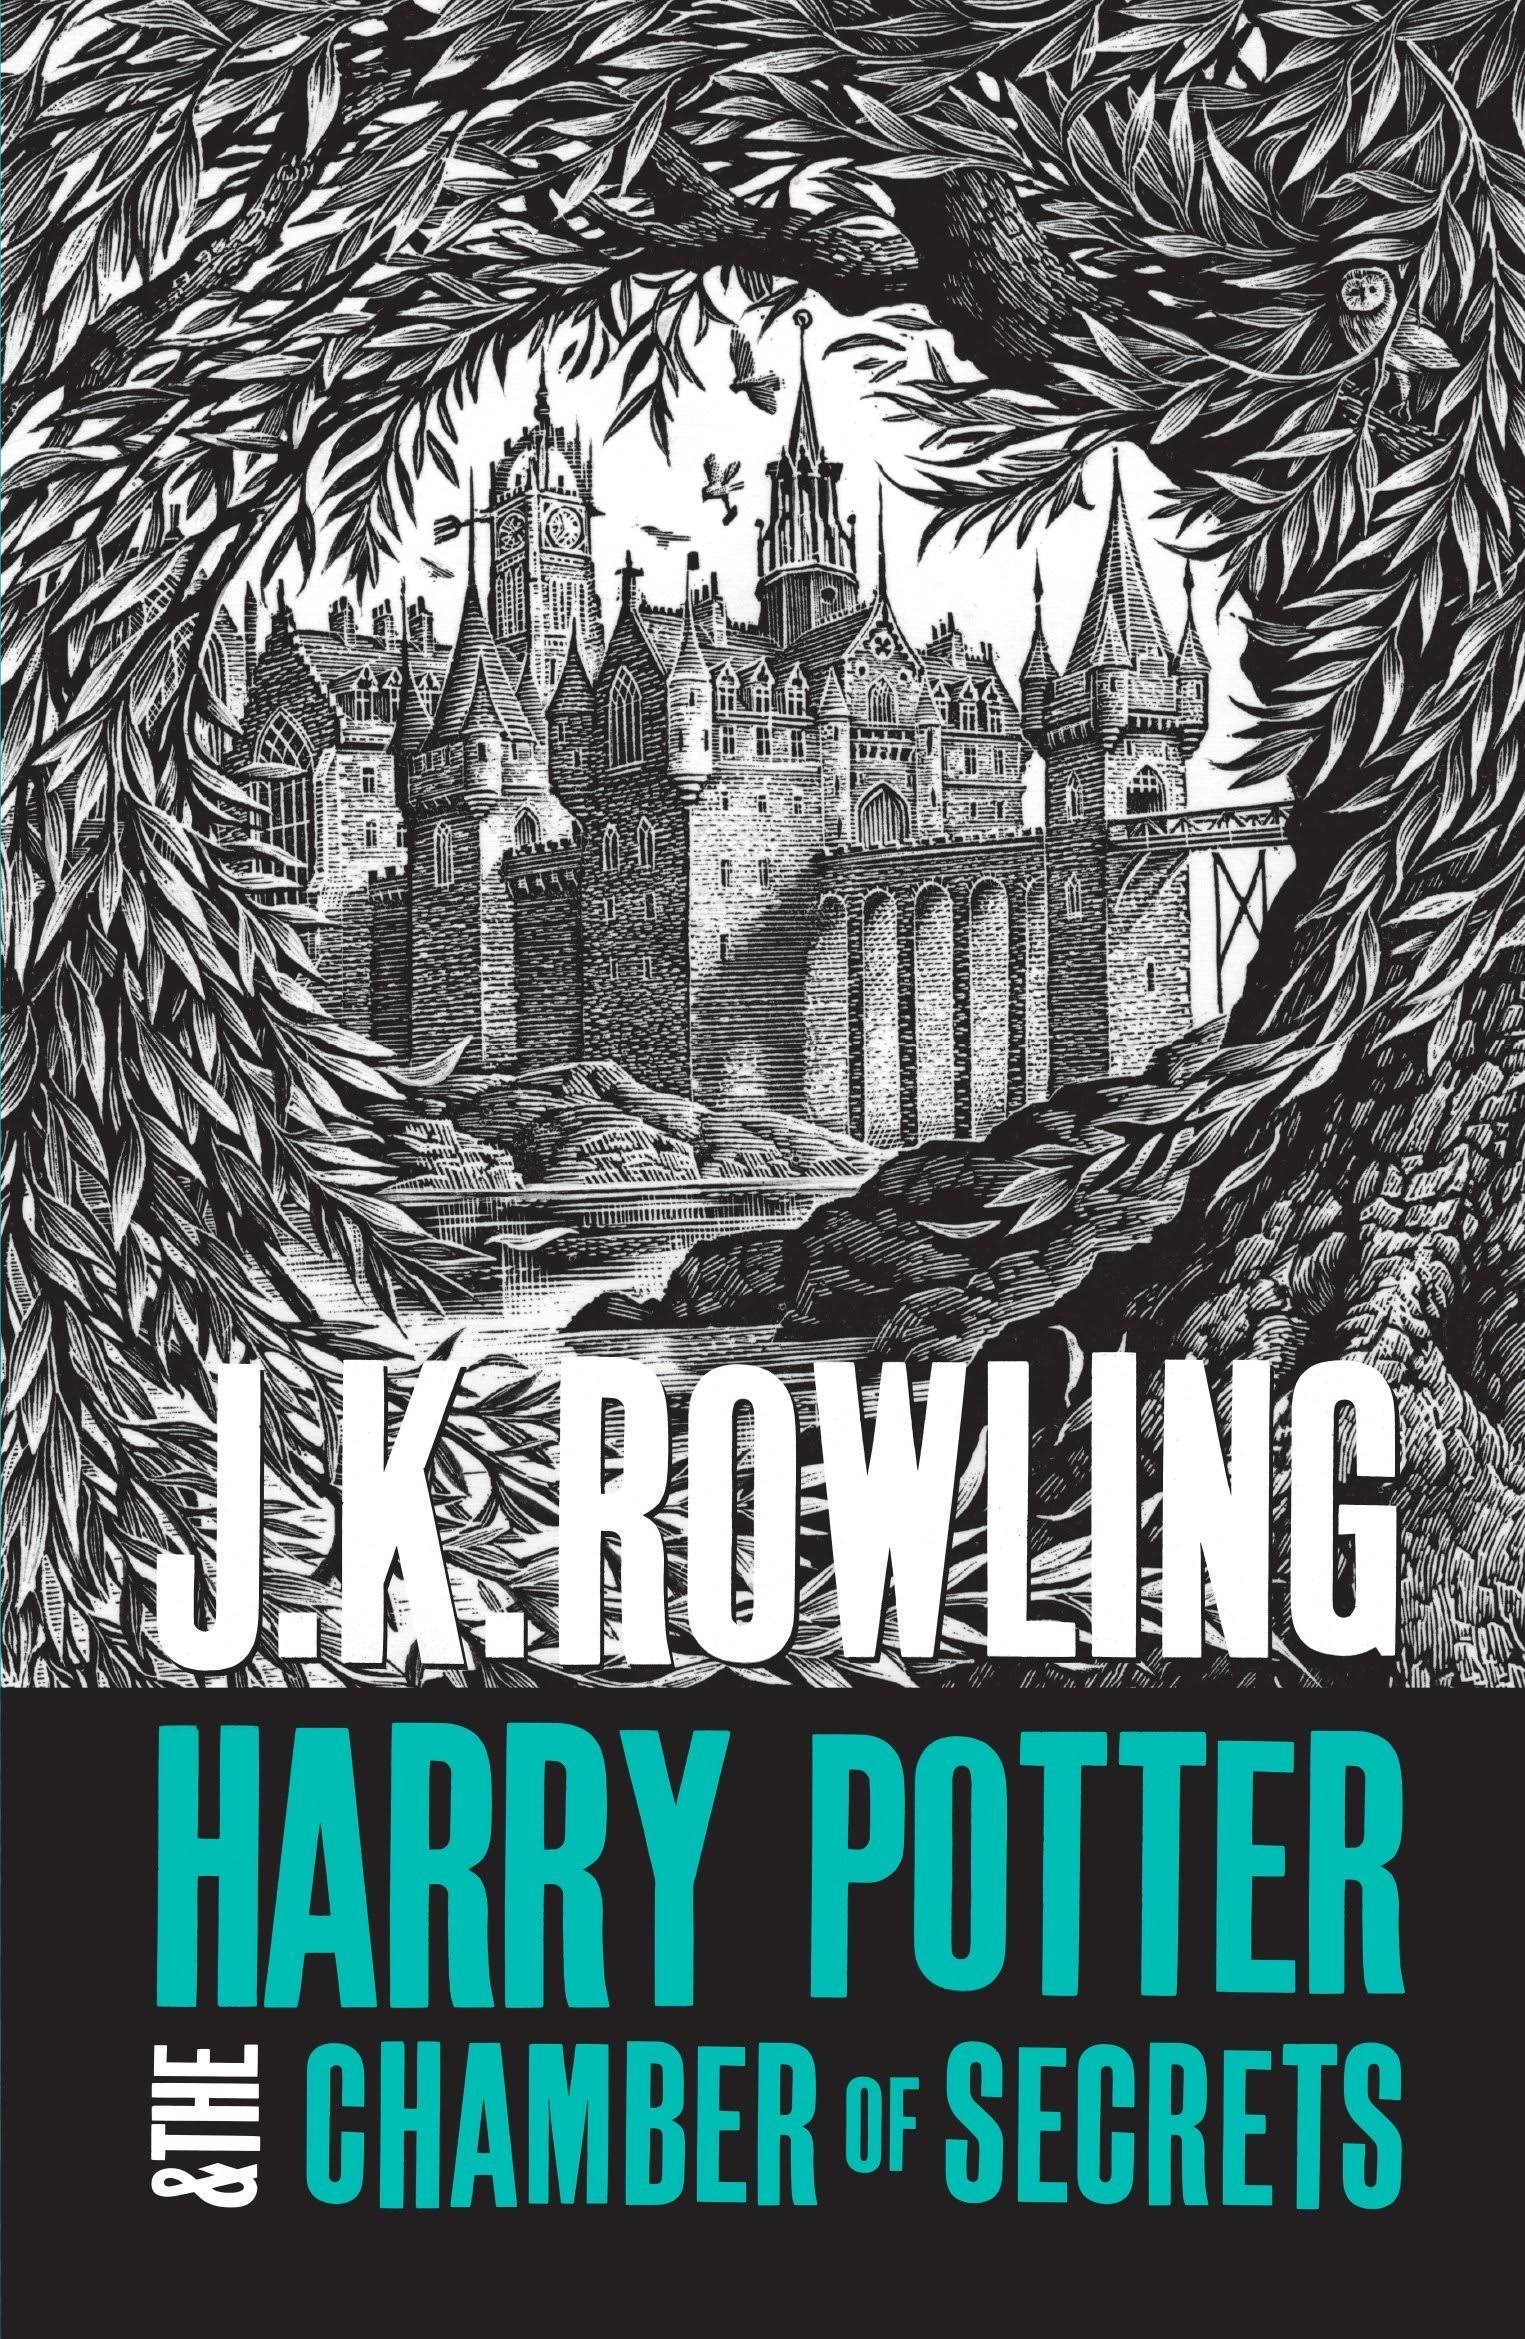 Harry Potter and The Chamber of Secrets by J K Rowling